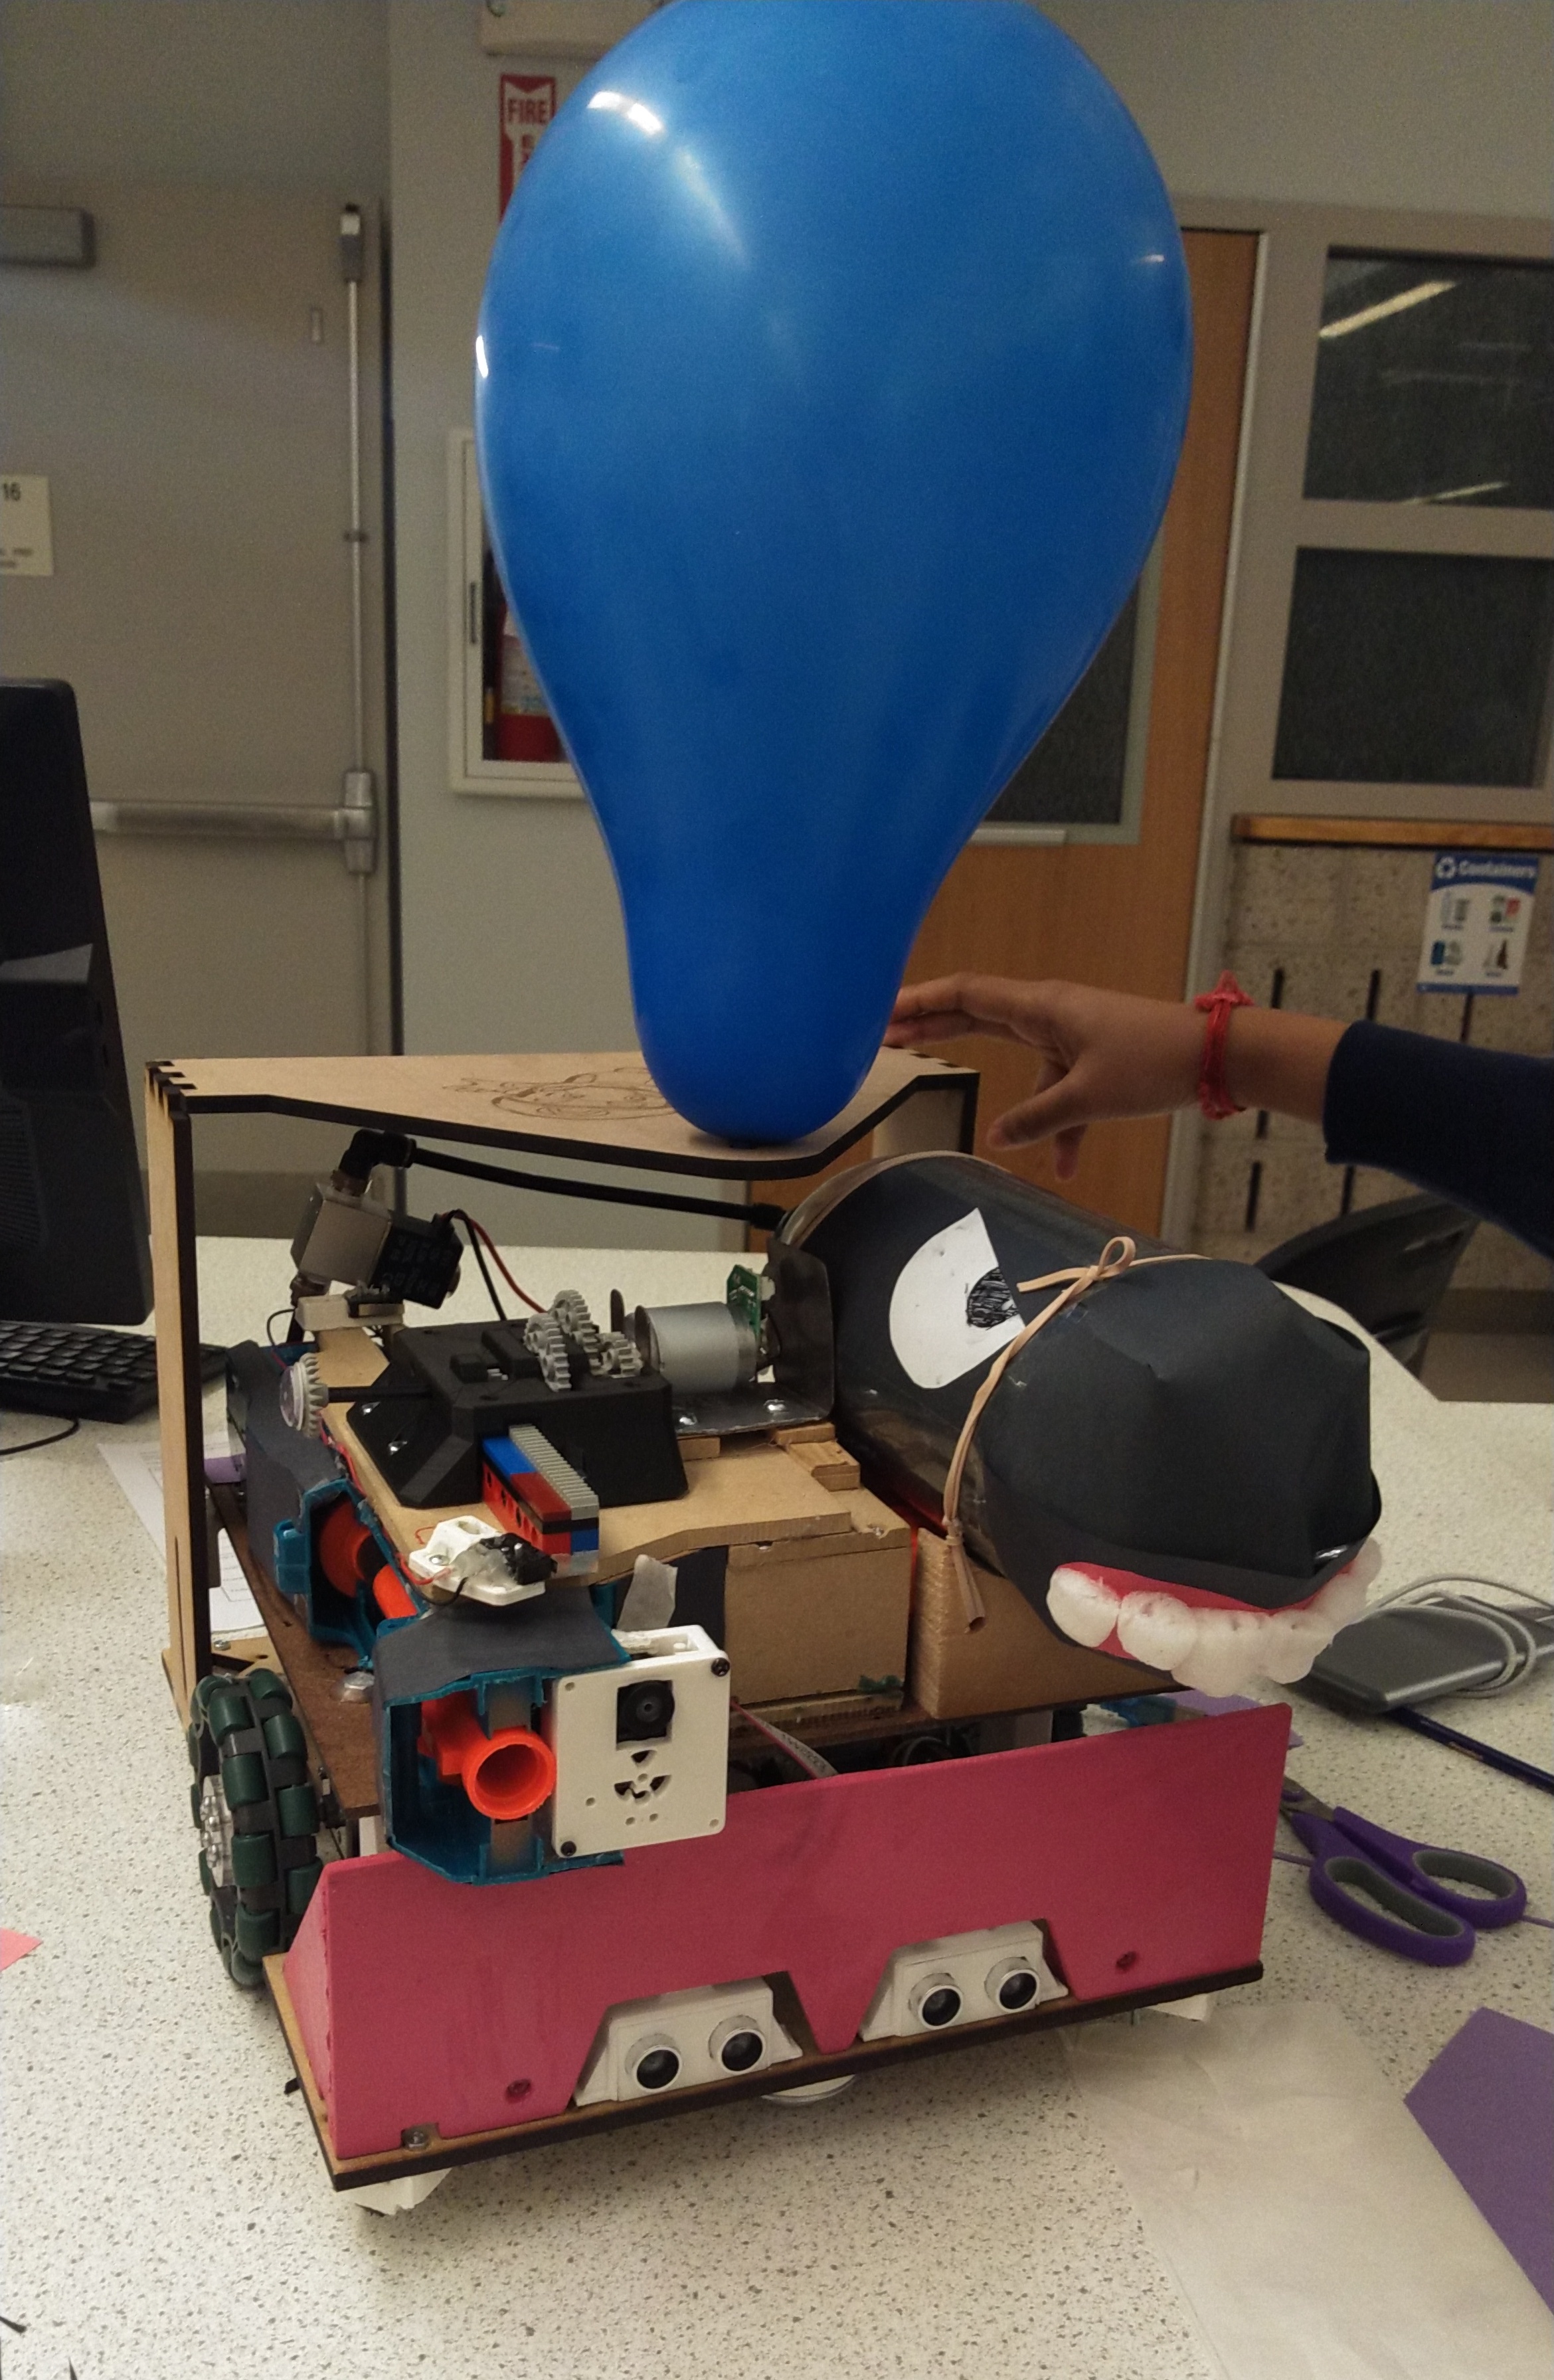 a robot sitting on a table. It has a balloon attached to its top.